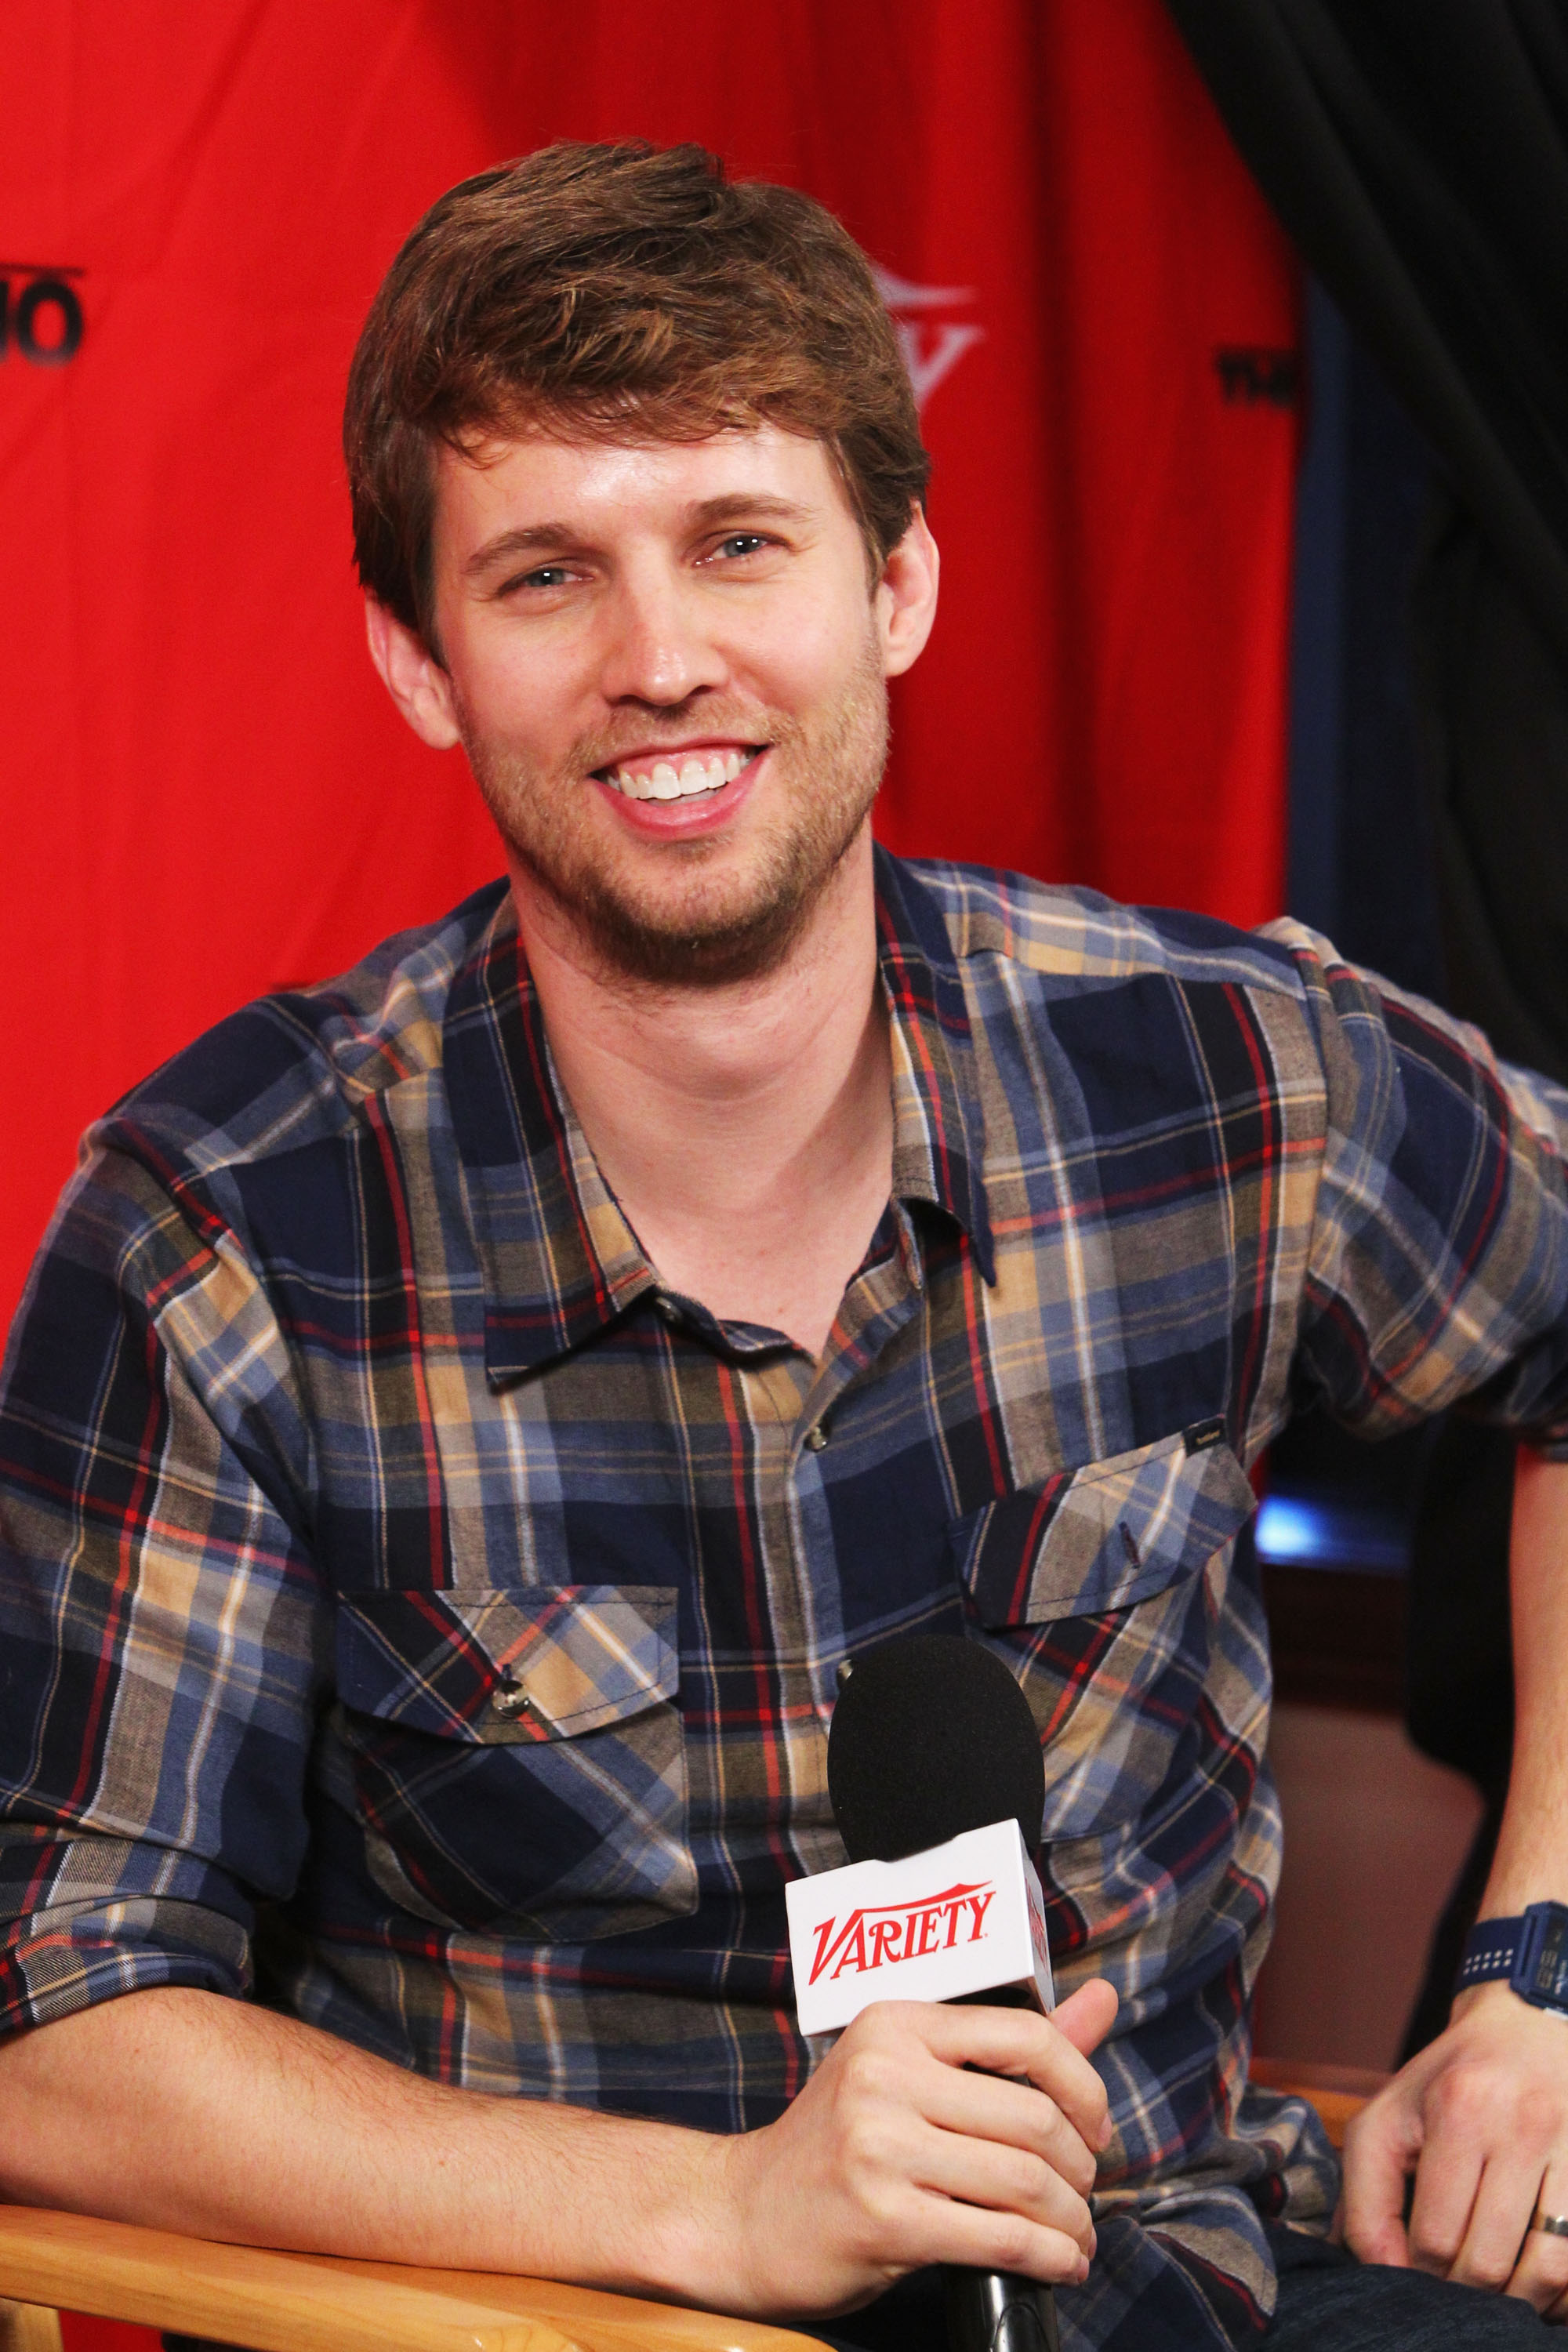 PARK CITY, UT - JANUARY 22: Actor Jon Heder attends Day 2 of the Variety Studio during the 2012 Sundance Film Festival held at Variety Studio At Sundance on January 22, 2012 in Park City, Utah. (Photo by Alexandra Wyman/Getty Images)